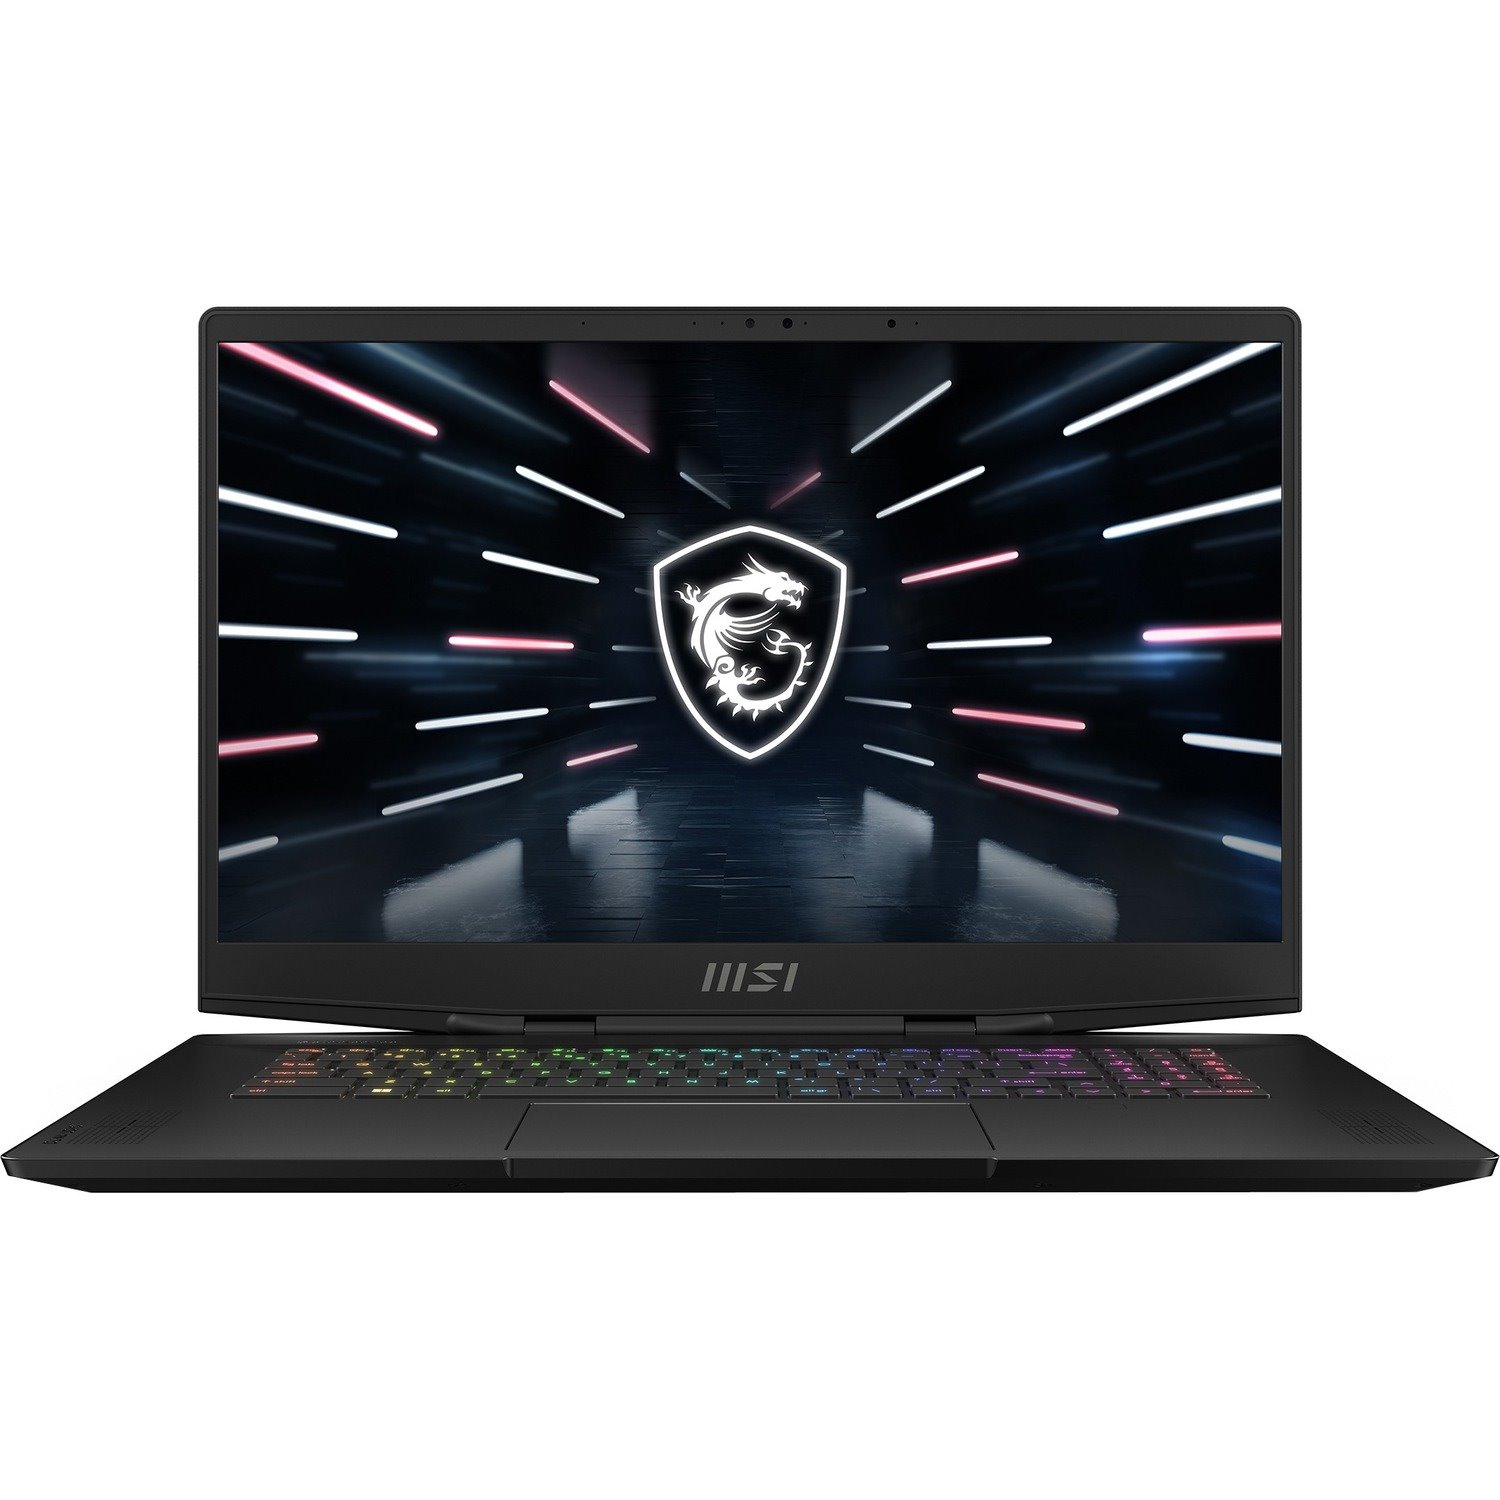 MSI Stealth GS77 Stealth GS77 12UHS-049AU 17.3" Gaming Notebook - UHD - 3840 x 2160 - Intel Core i9 12th Gen i9-12900H - 64 GB Total RAM - 2 TB SSD - Core Black